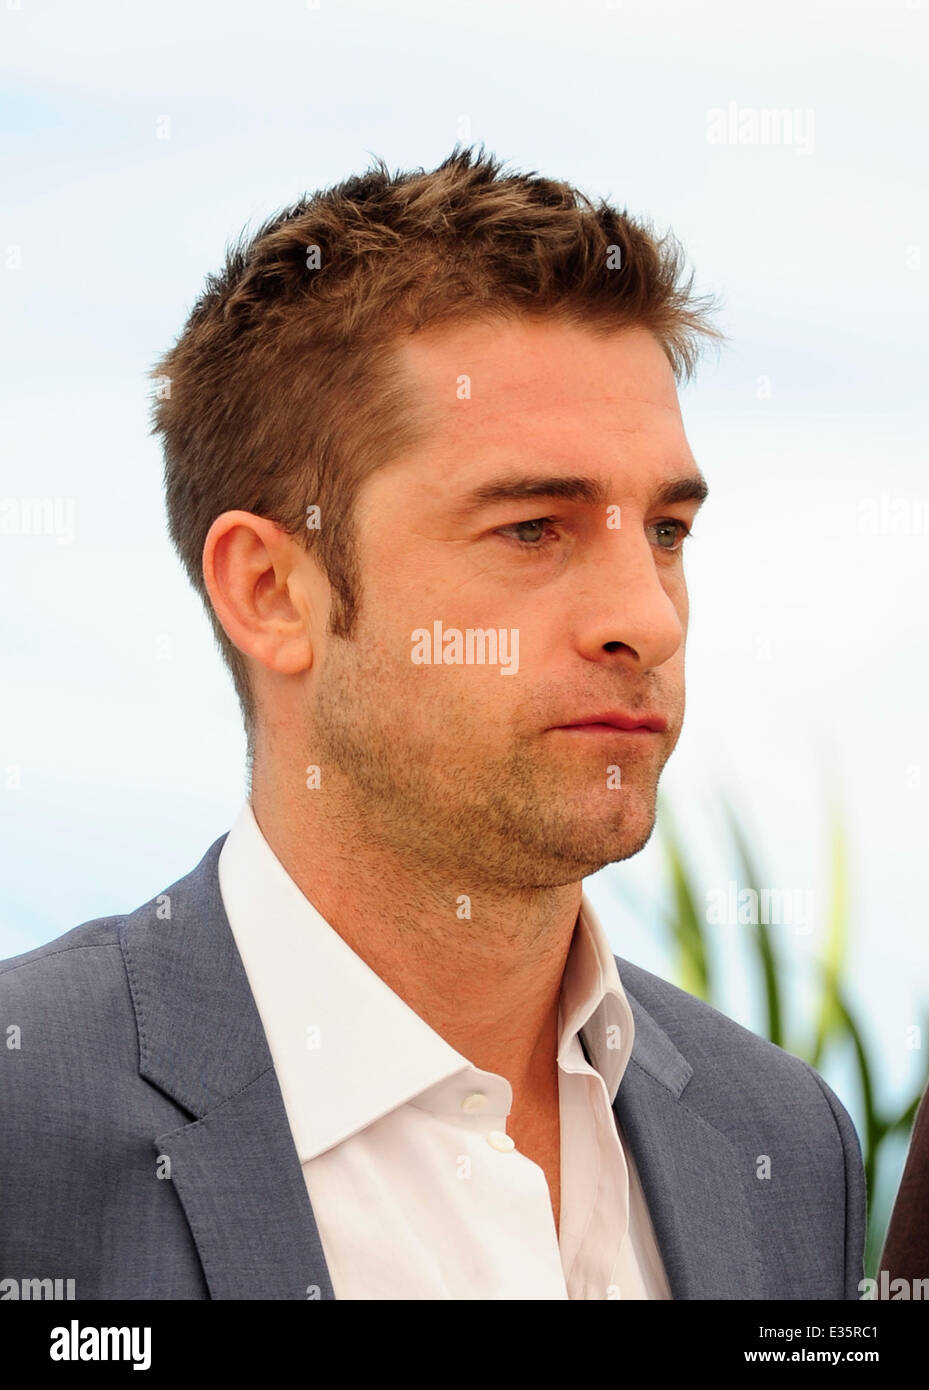 Download preview image - stephen-traynor-at-the-photocall-for-captive-at-cannes-6th-may-2014-E35RC1